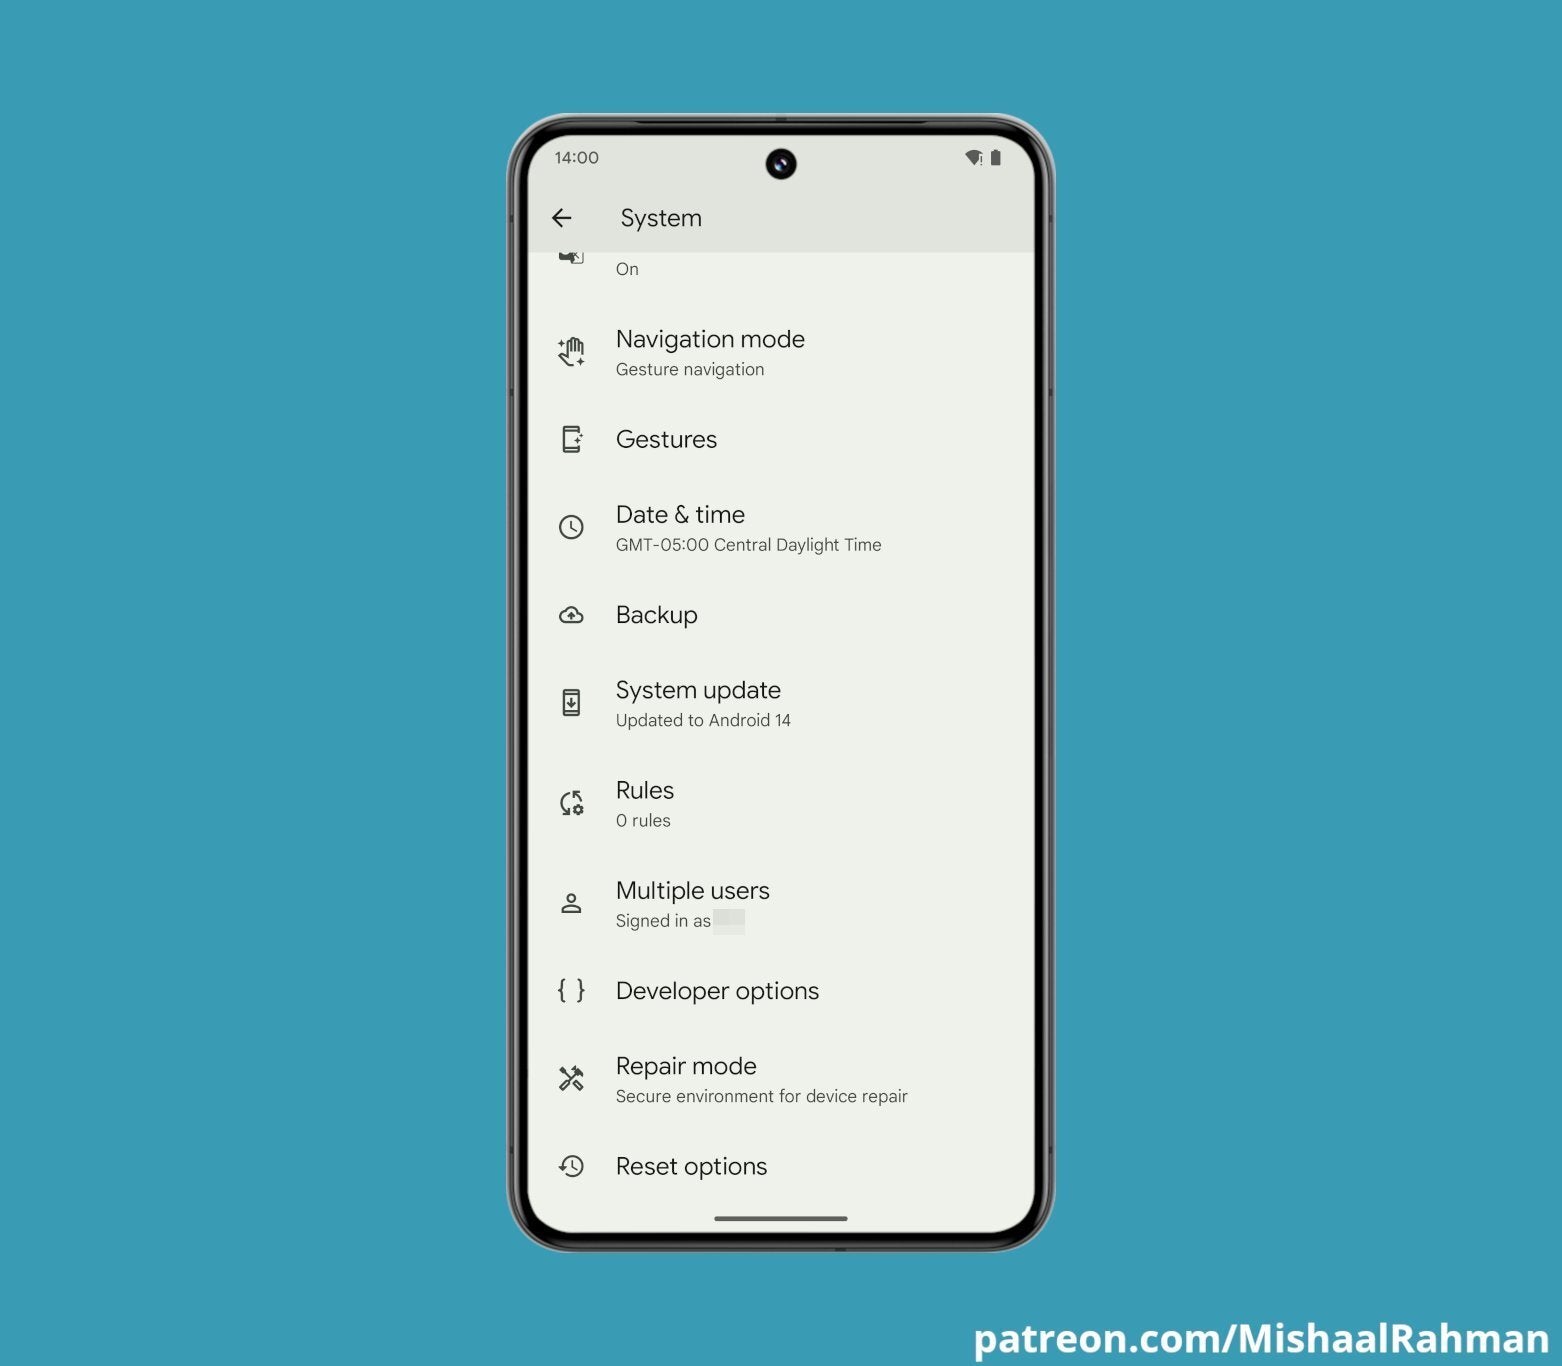 Image Credit–Mishaal Rahman - Securing your data: Google works on &quot;repair mode&quot; in Android 14 for hassle-free device repairs